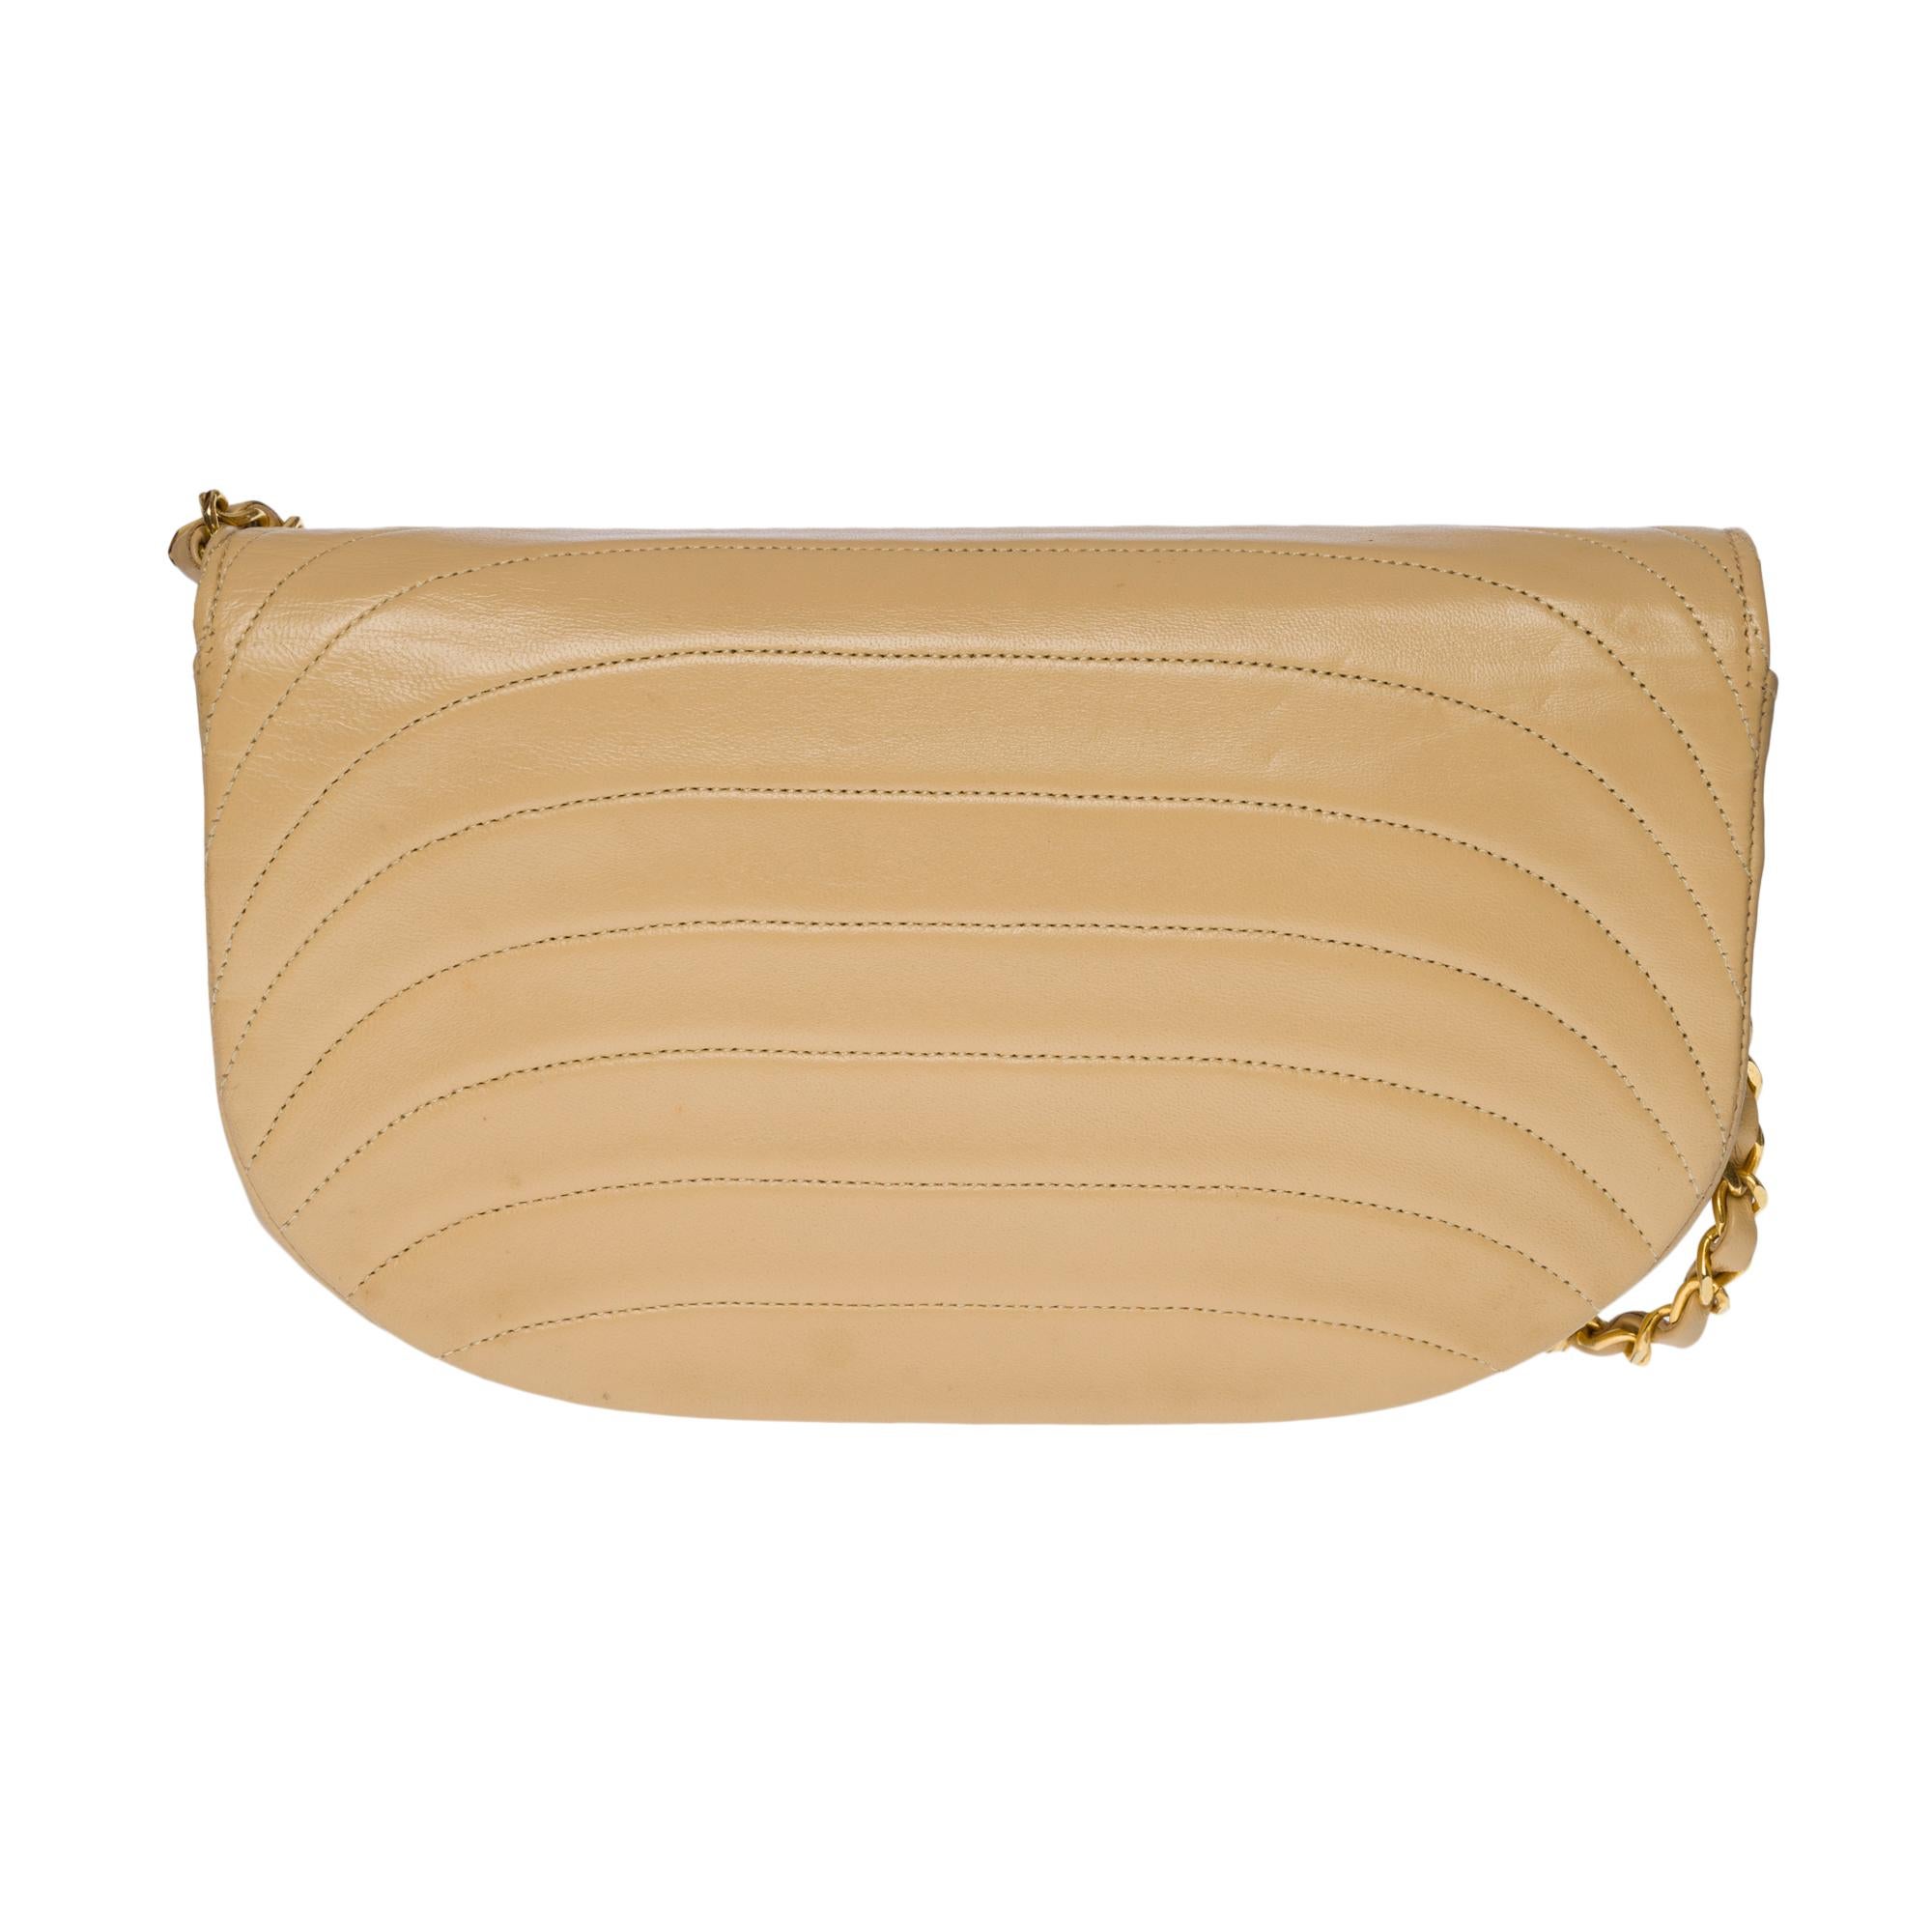 Lovely Chanel vintage Demi-lune (Half-moon) shoulder bag in beige quilted leather, gold-plated metal hardware, a gold-plated metal chain handle interwoven with beige leather for a hand, shoulder or shoulder strap

Gold Metal Flap Closure
Beige